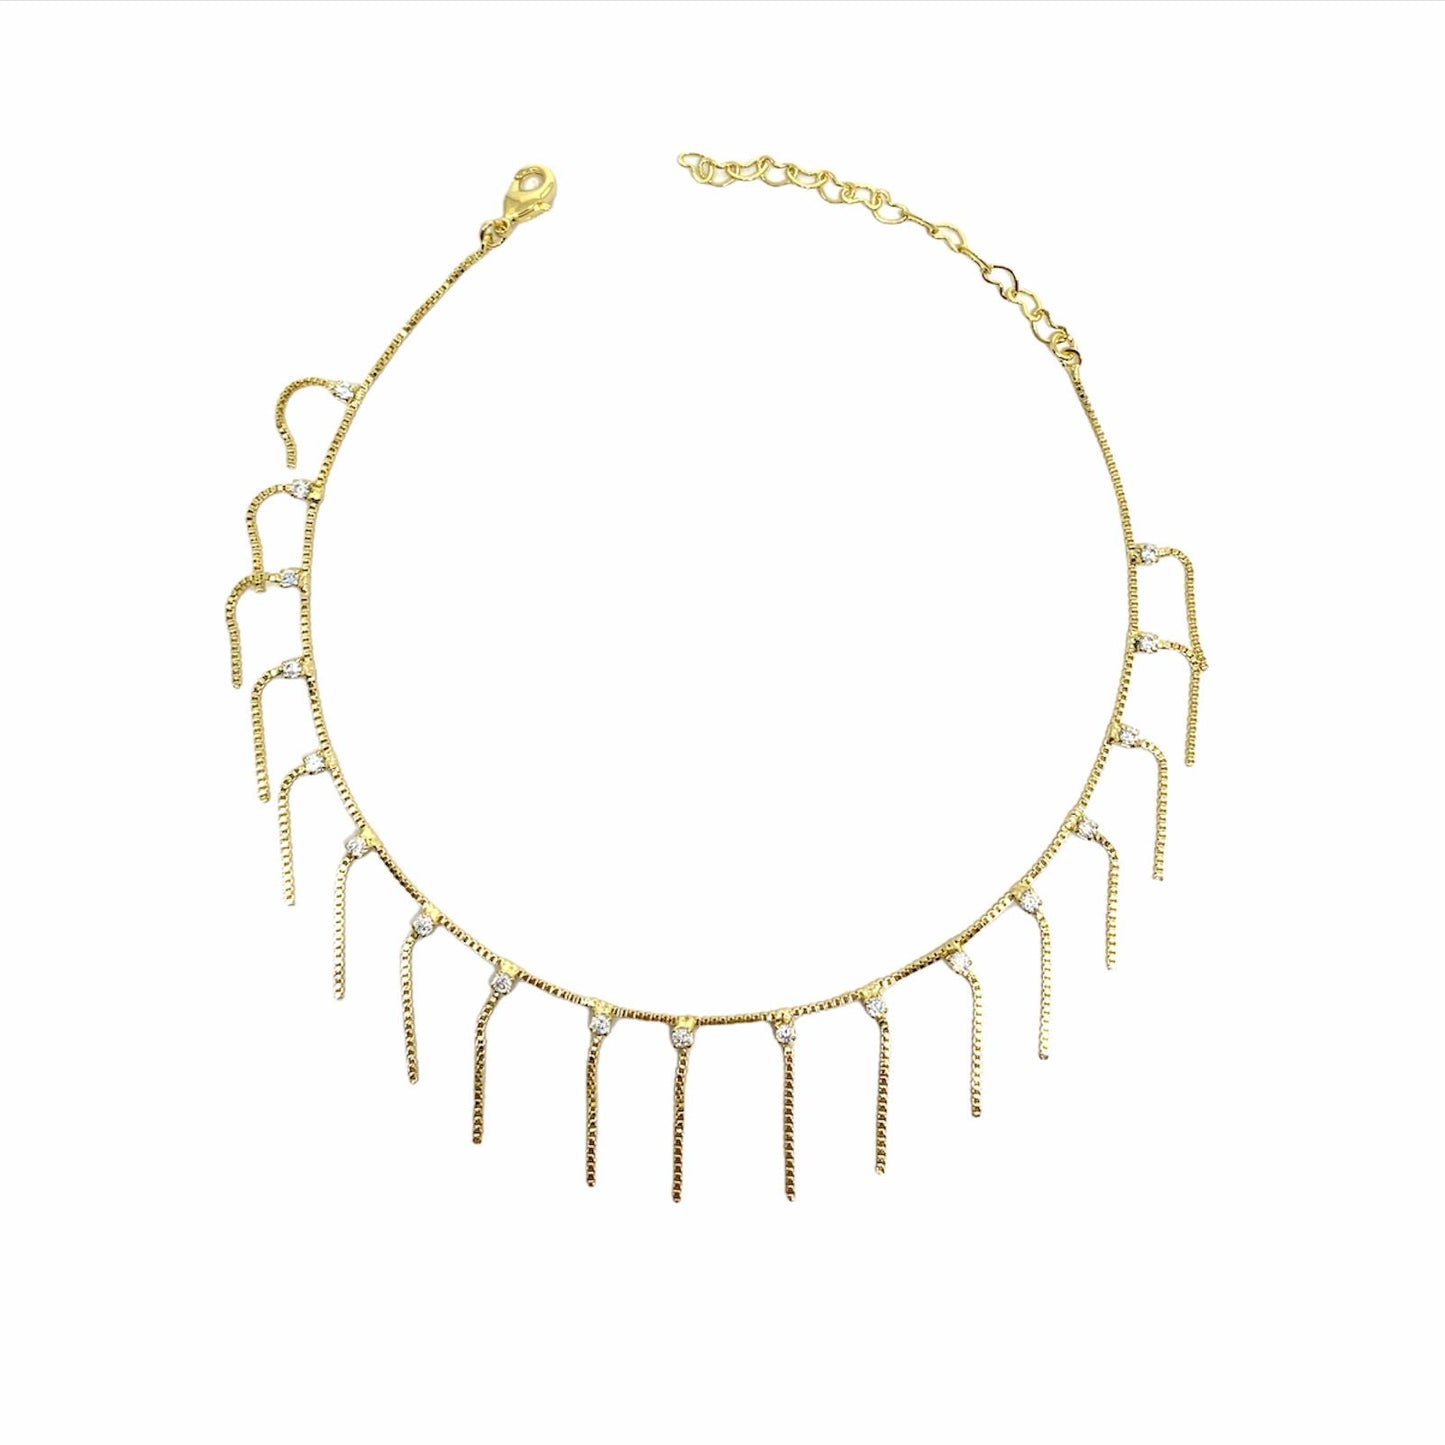 GoldFi 18k Gold Filled Fringed Box Chain Anklet Featuring Details Of Micro Zirconia Available In Multicolor, Black or Clear